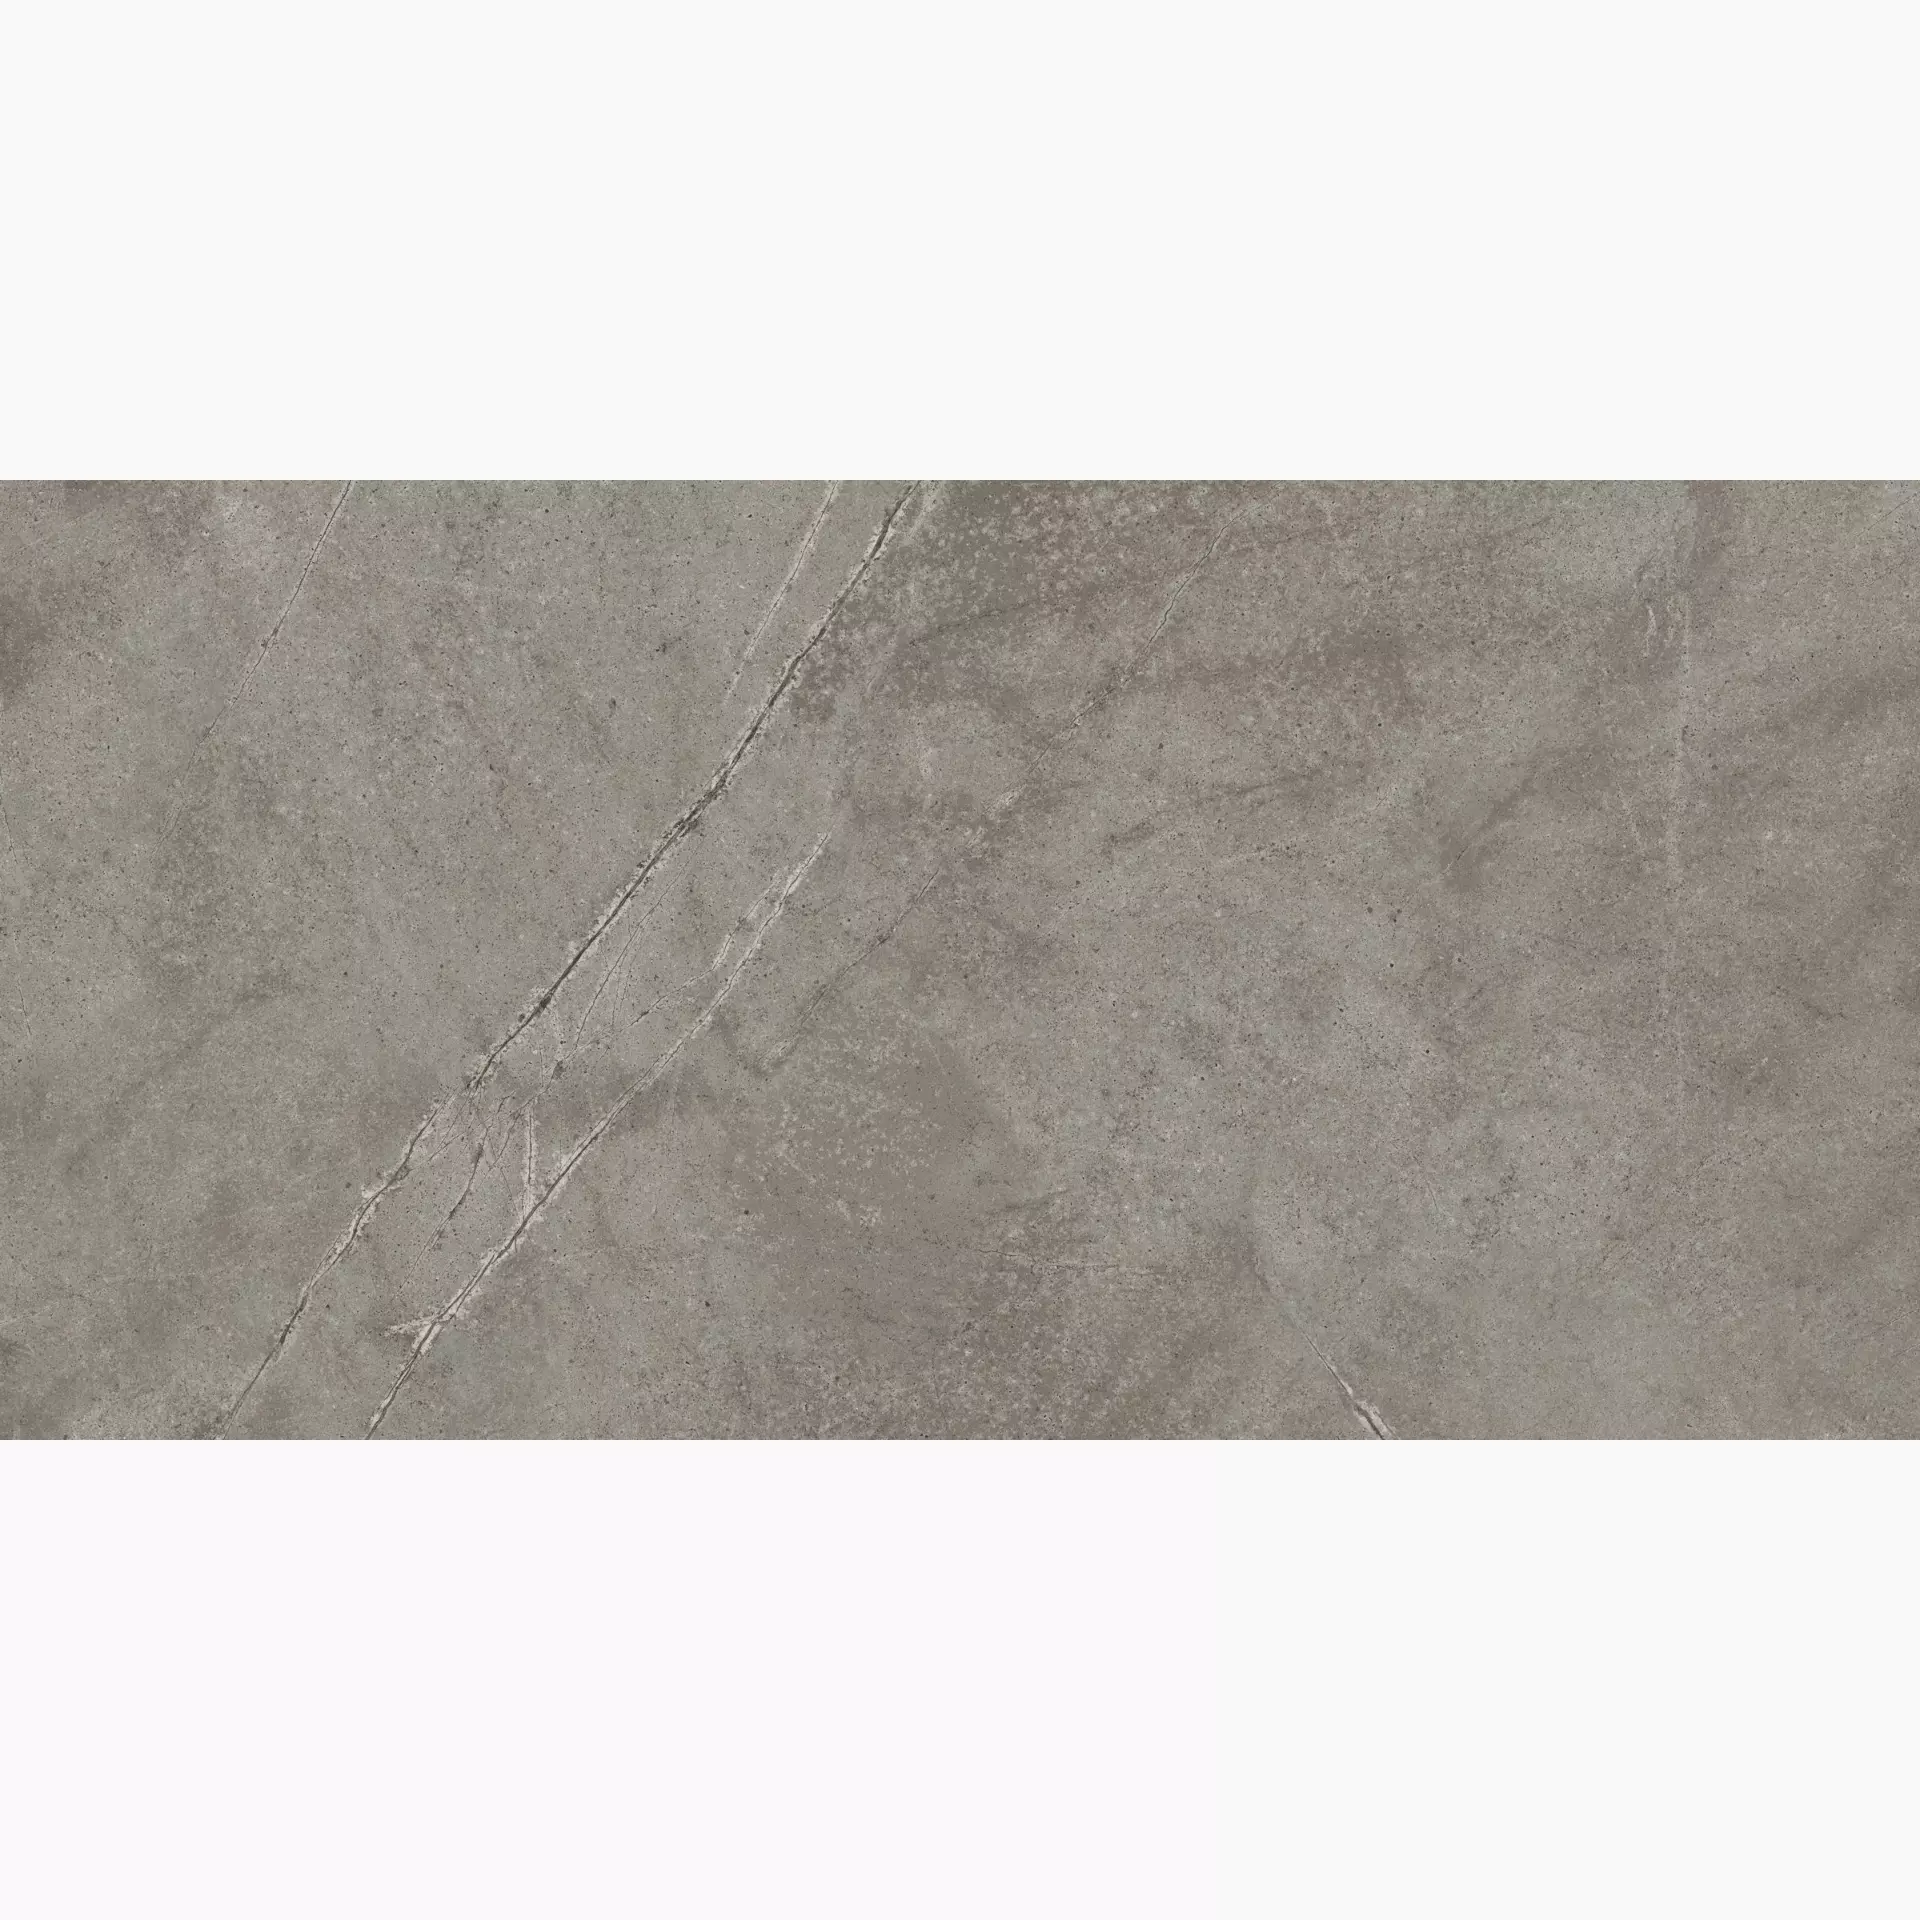 ABK Atlantis Taupe Naturale PF60005864 60x120cm rectified 8,5mm